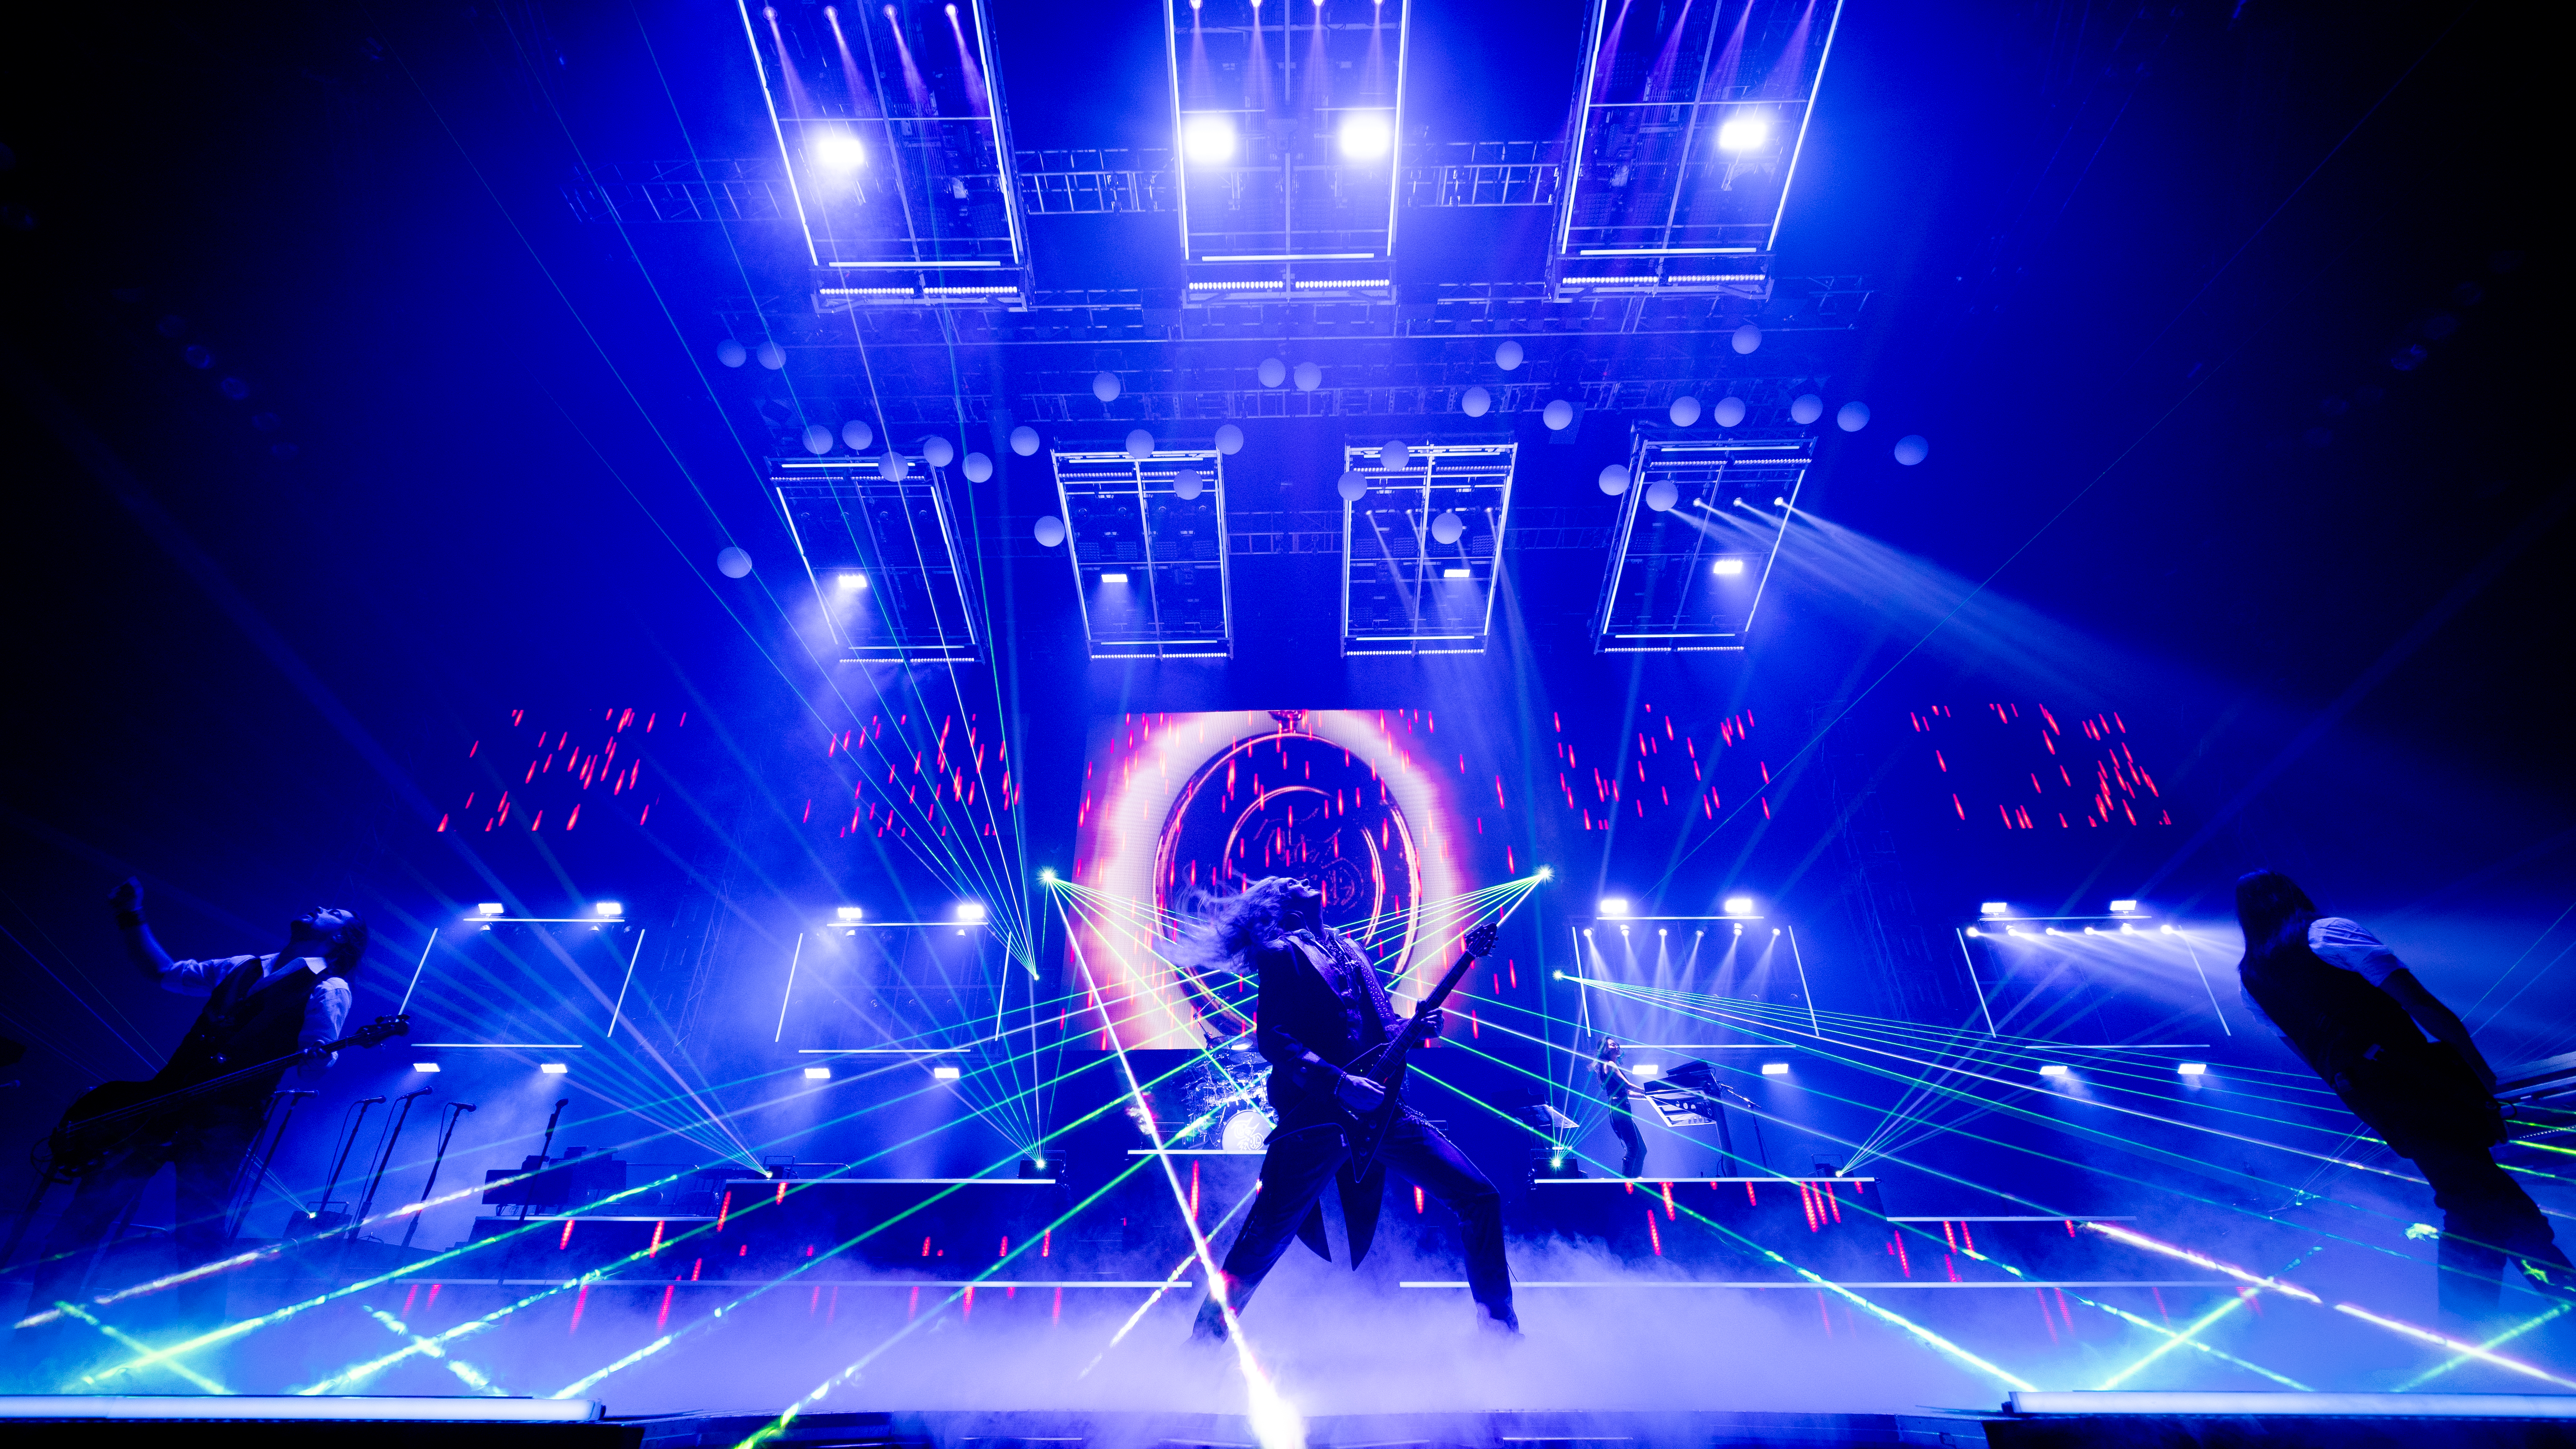 Trans-Siberian Orchestra returns for the Holidays 